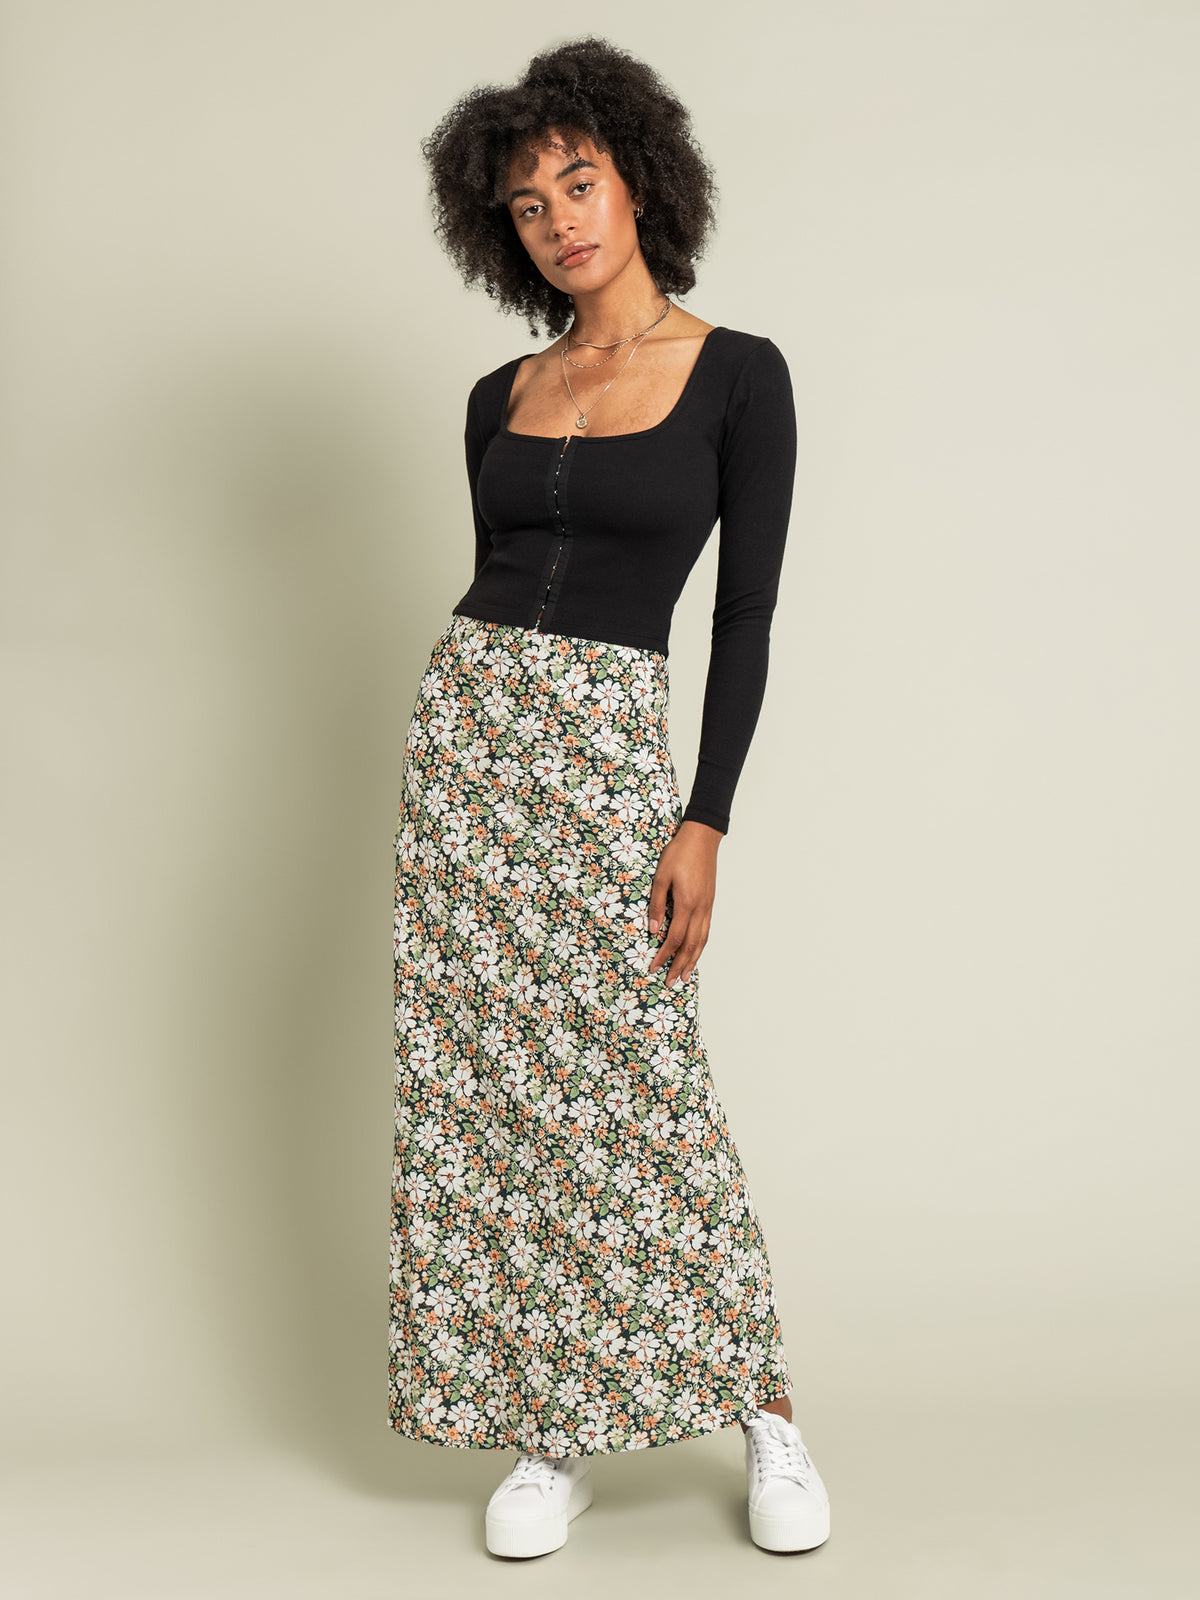 Zaria Maxi Skirt in Floral